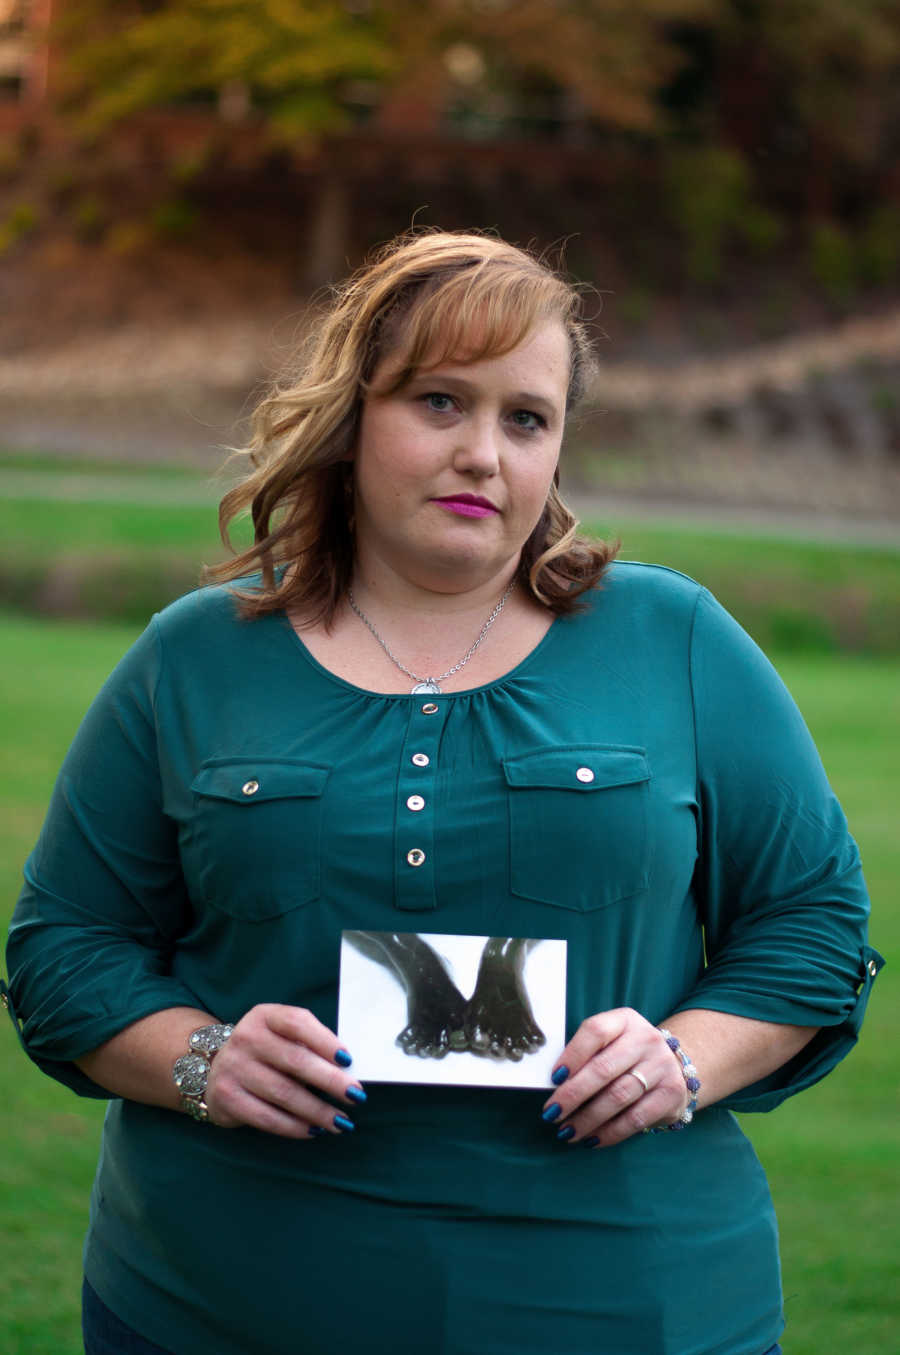 Woman who miscarried stands outside holding picture of baby feet in front of her